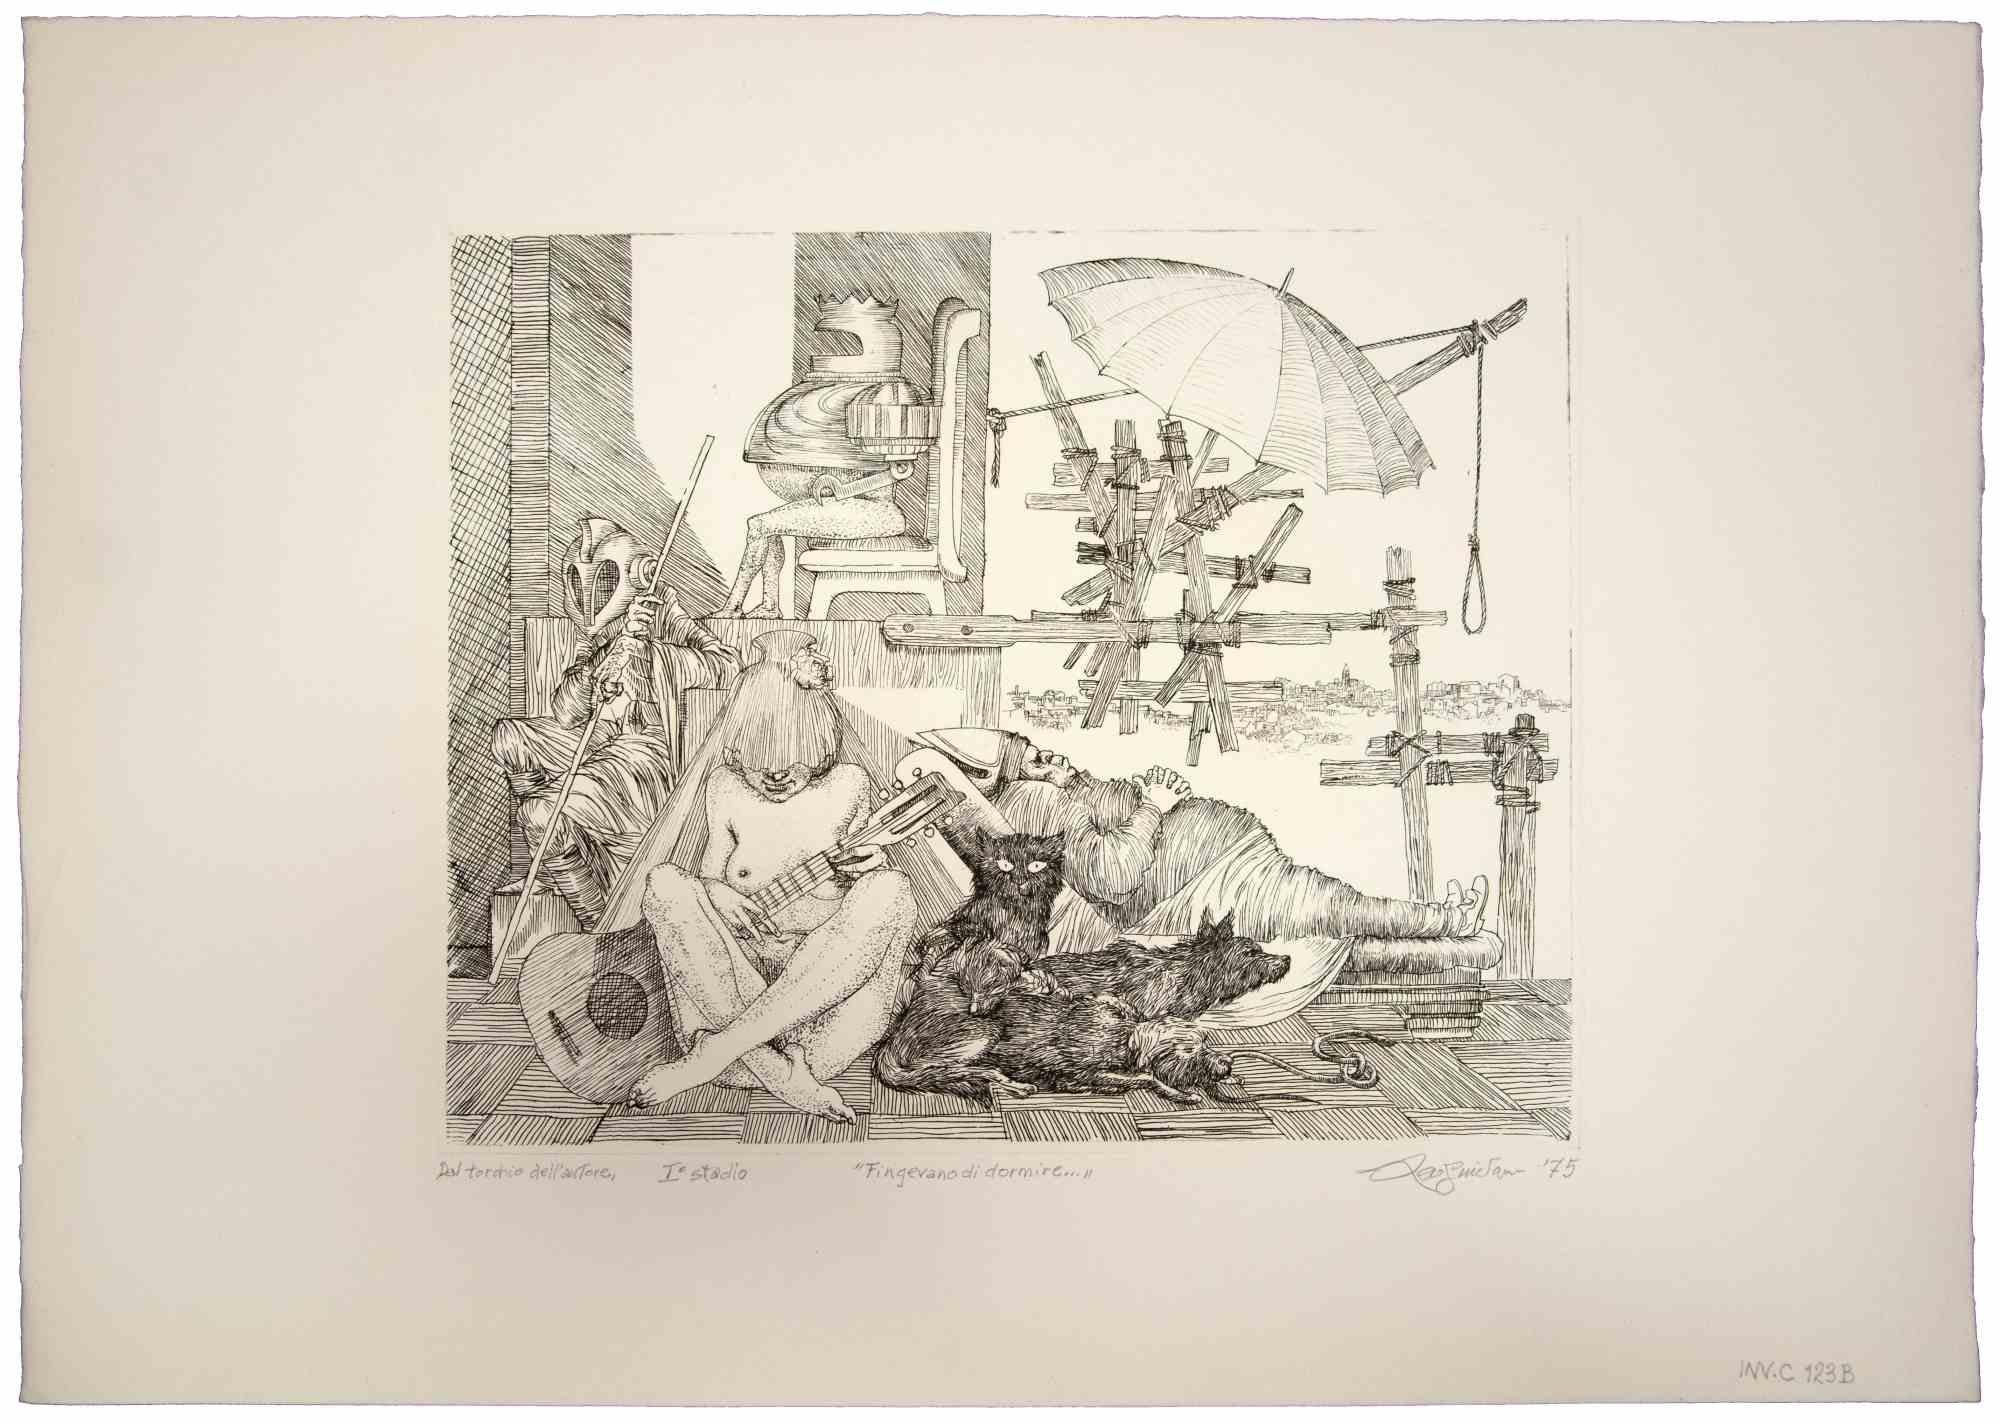 Fingevano di Dormire  (They Pretended to Sleep) is an original artwork realized by the italian Contemporary artist  Leo Guida  (1992 - 2017) in 1975s.

Original black and white etching on paper.

Excellent condition. Signed and dated on the lower